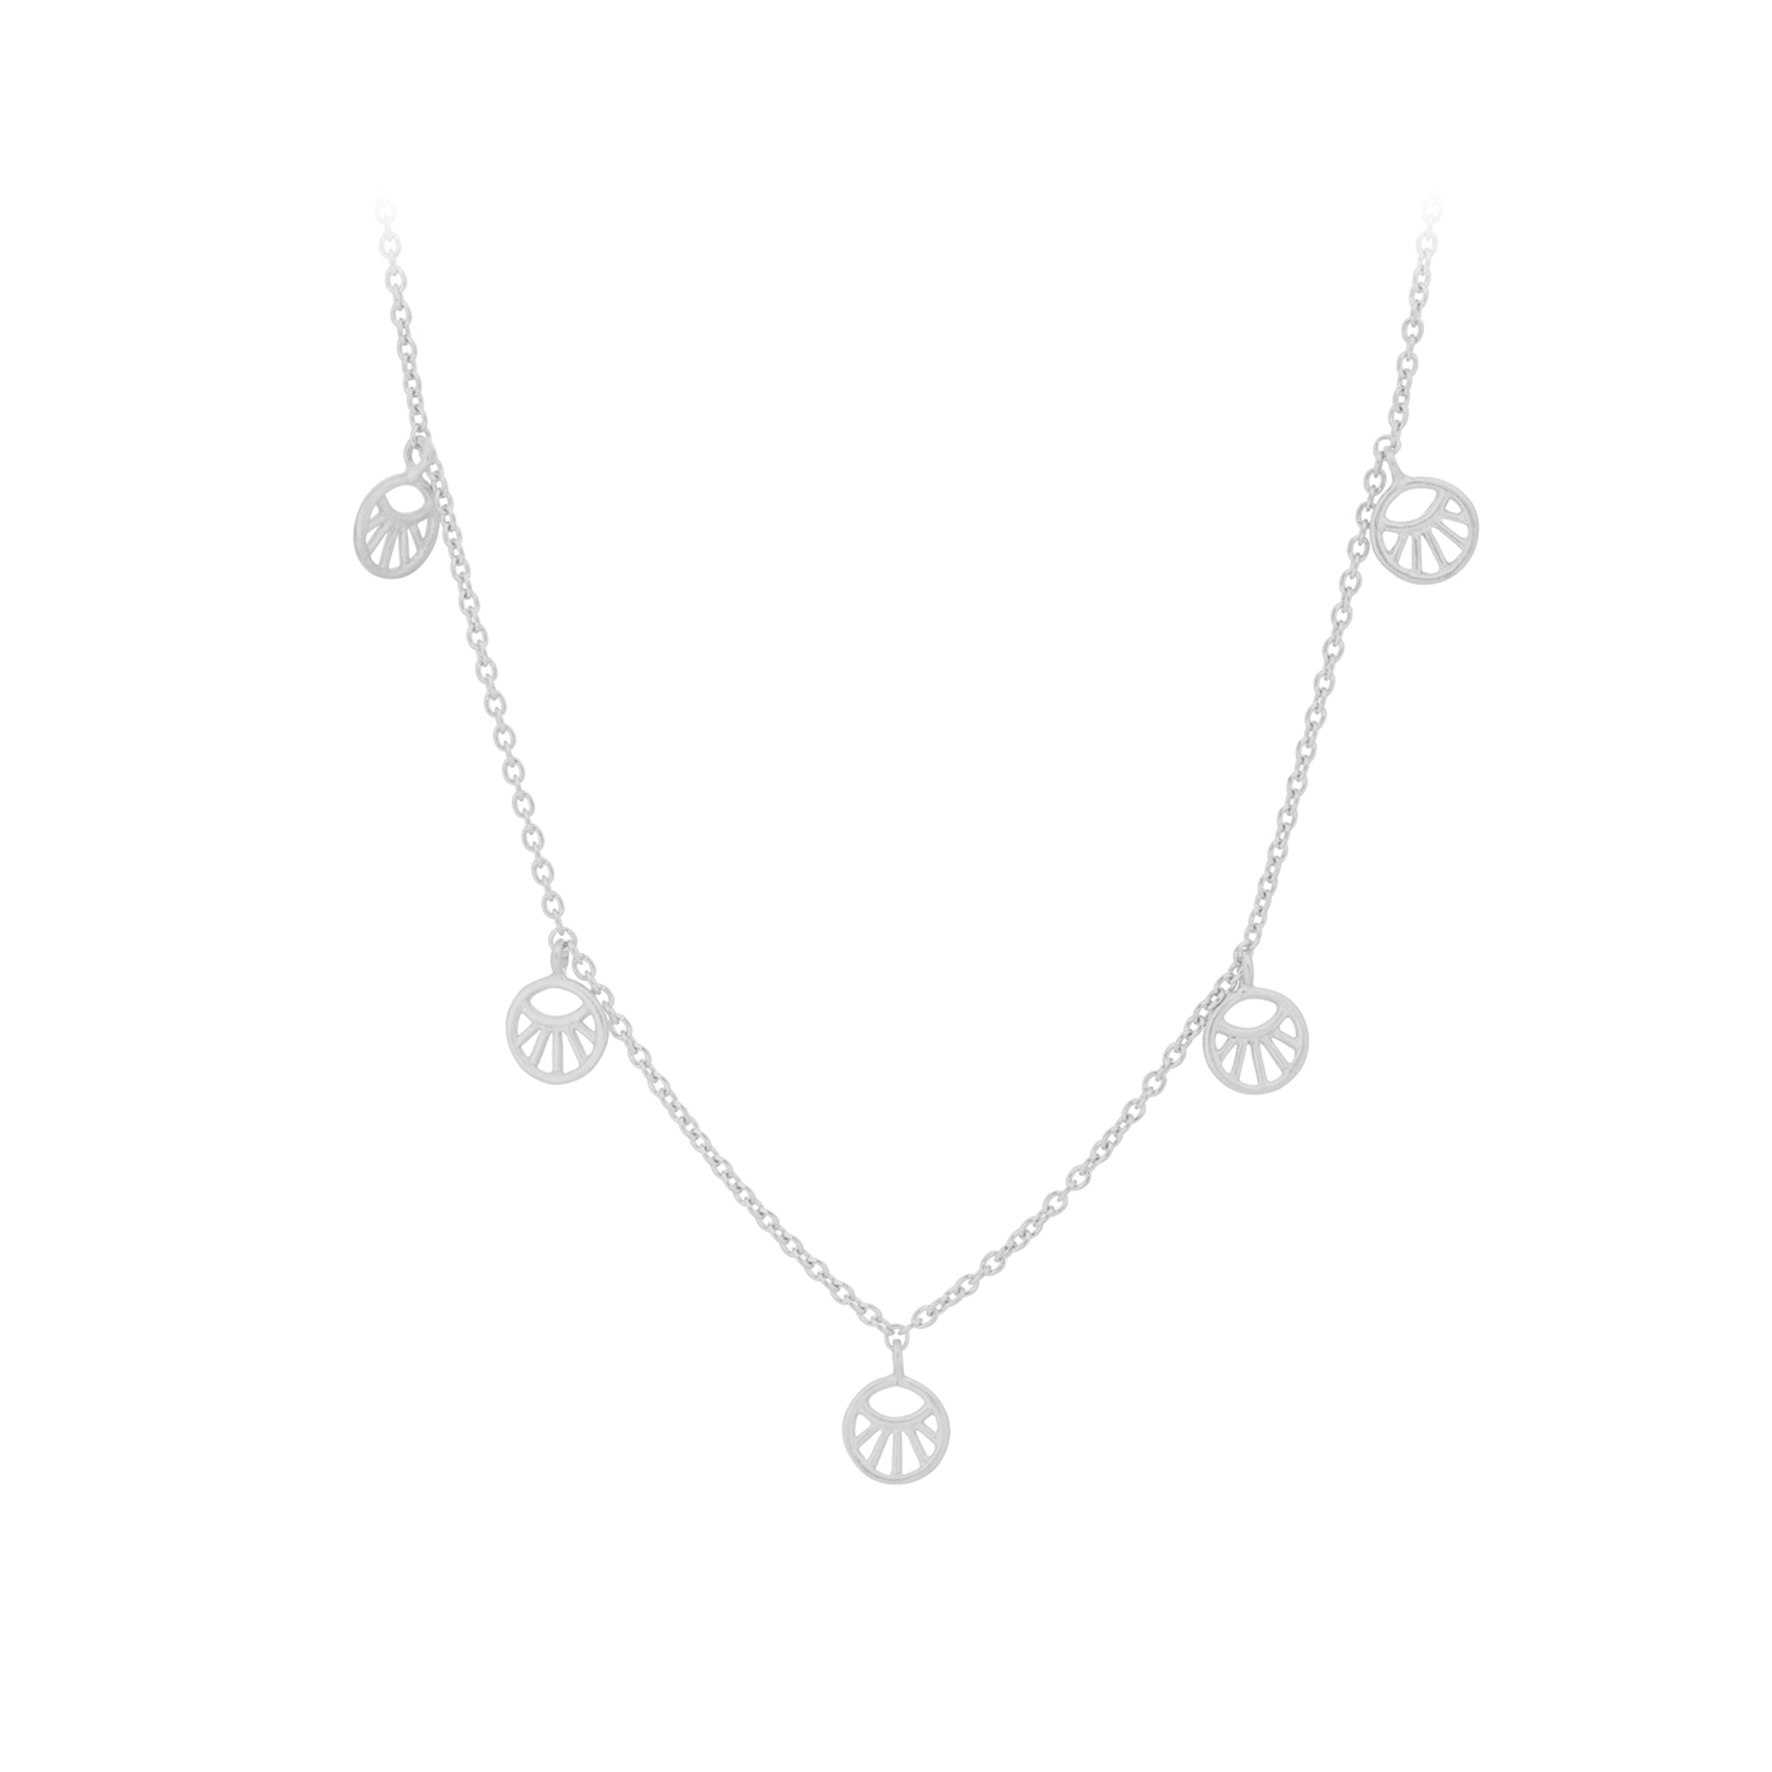 Mini Daylight Necklace from Pernille Corydon in Silver Sterling 925